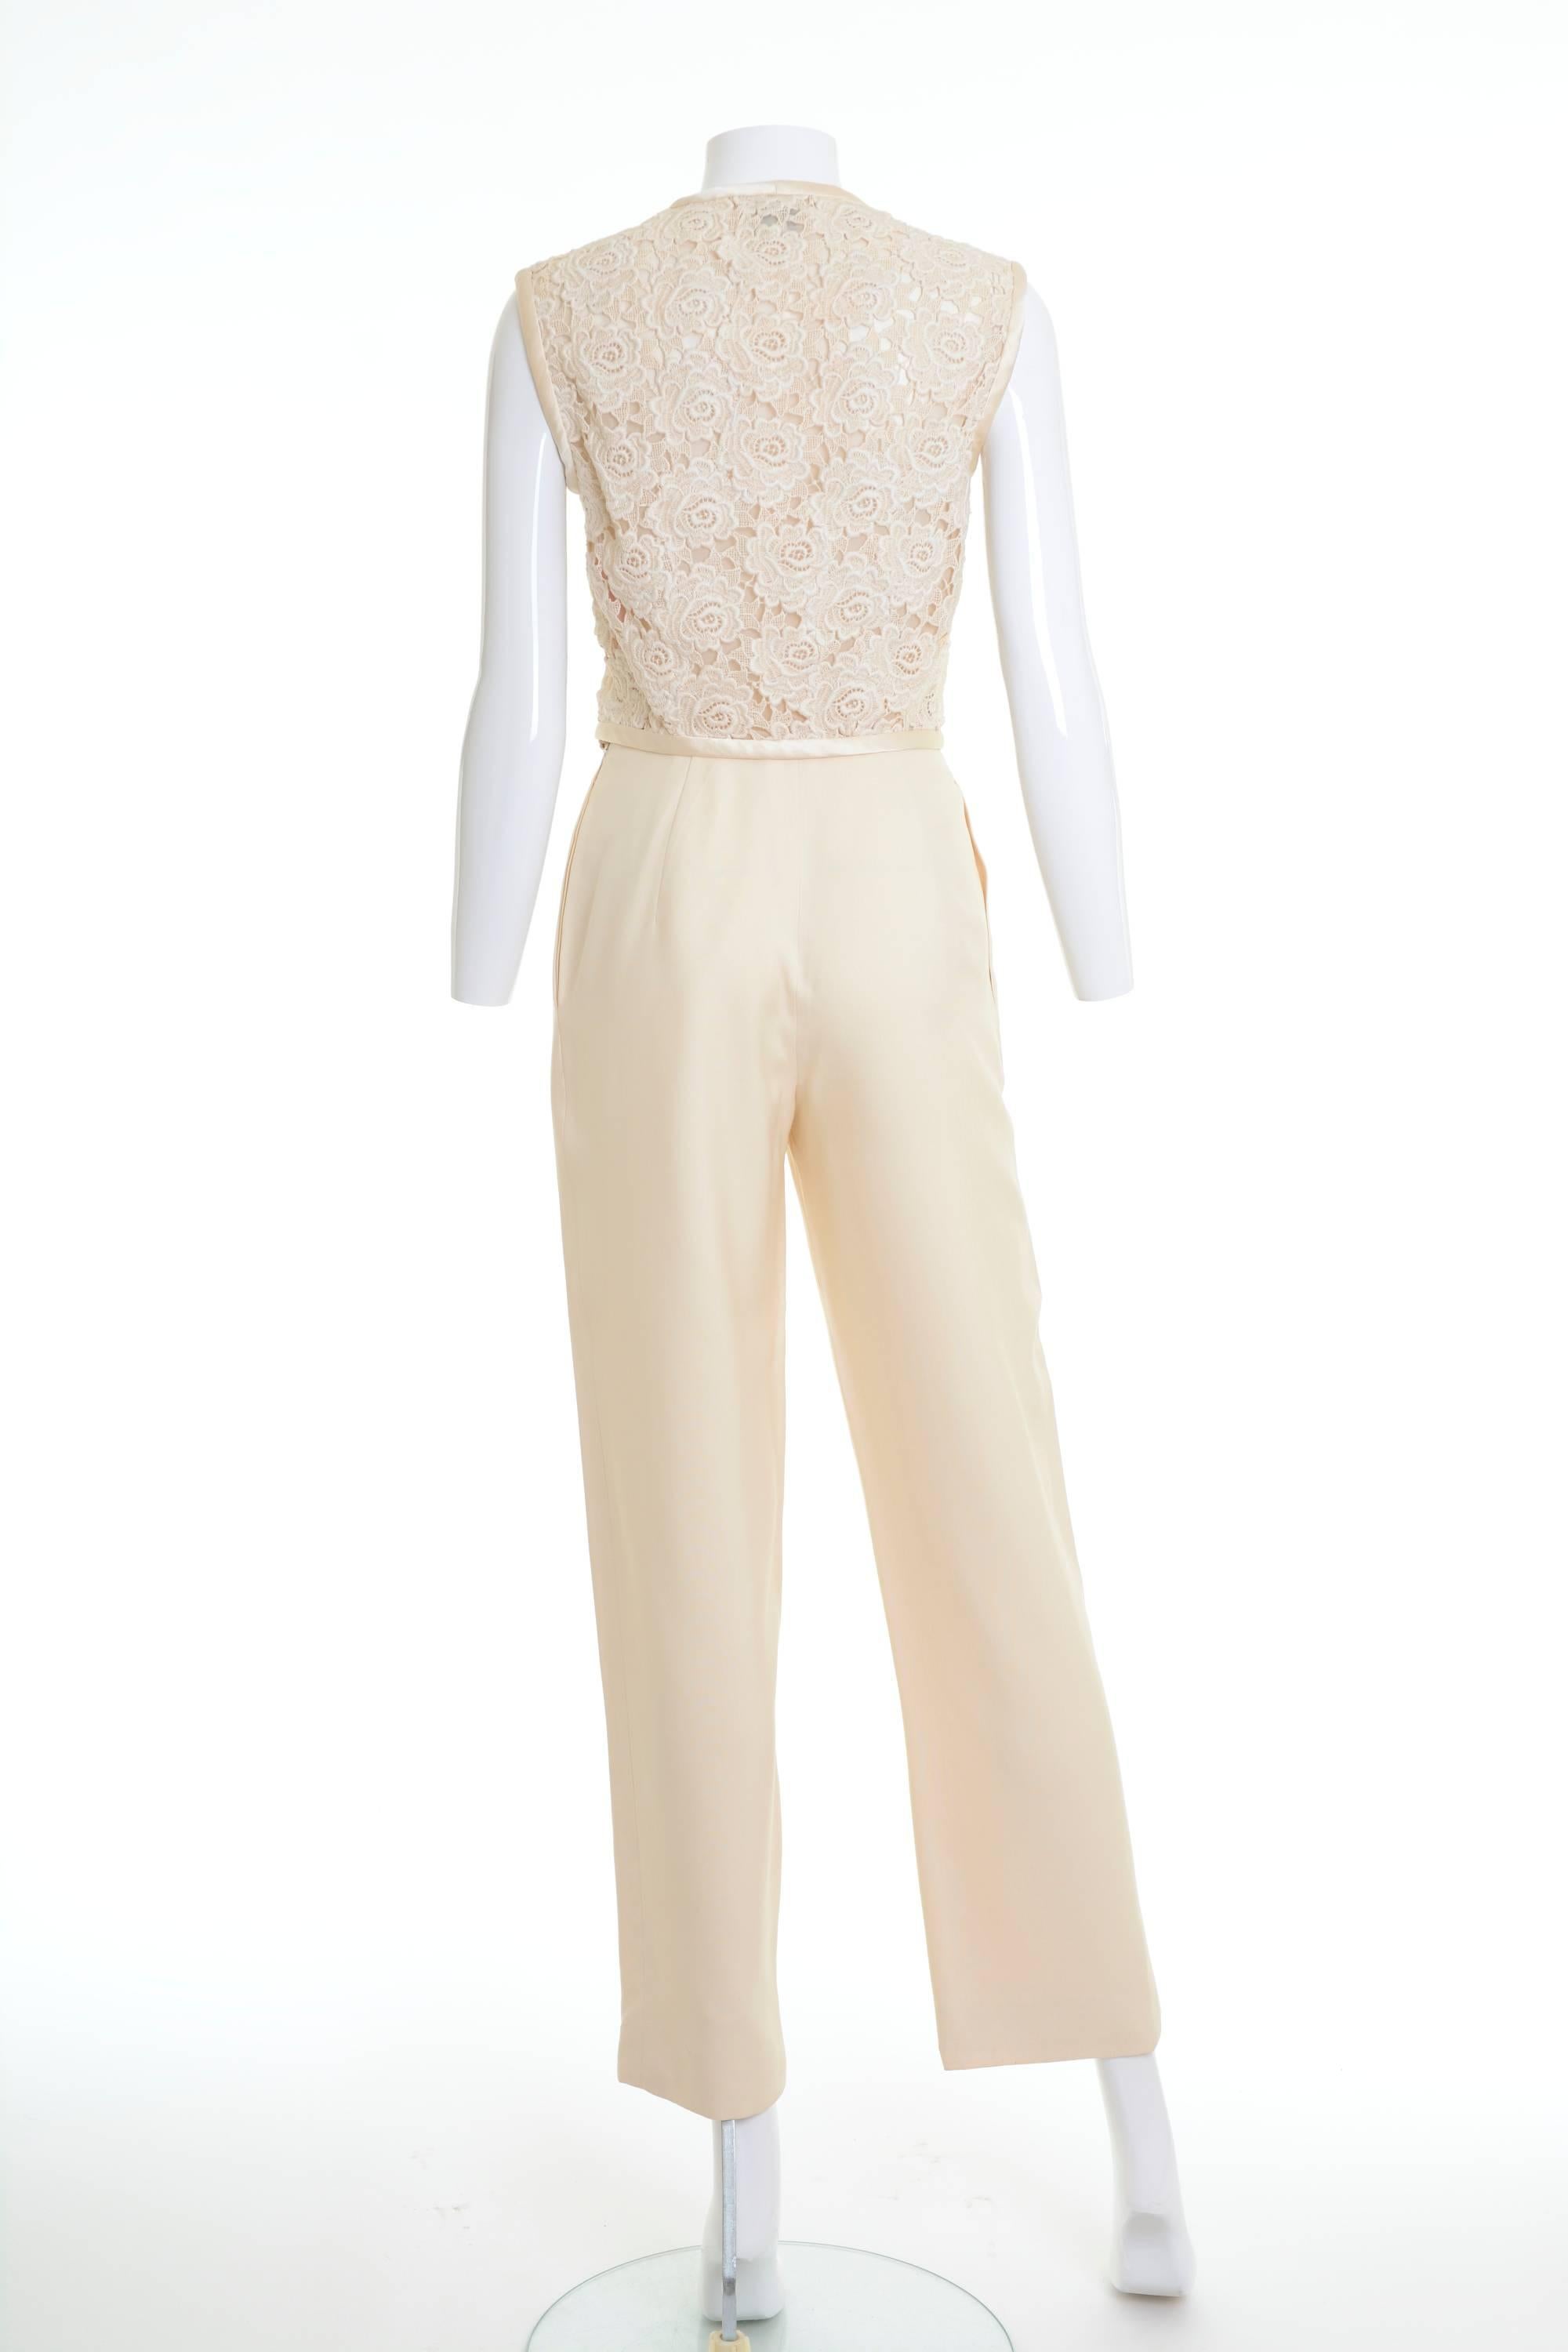 1980's Valentino Boutique cream suit pants. Blouse shirt in a crochet fabric, silk edges, buttons with beads, chiffon lining. Tailored pants in a gabardine cotton fabric, side zip closure, seam pockets, fully lined. Made in Italy 

Excellent Vintage